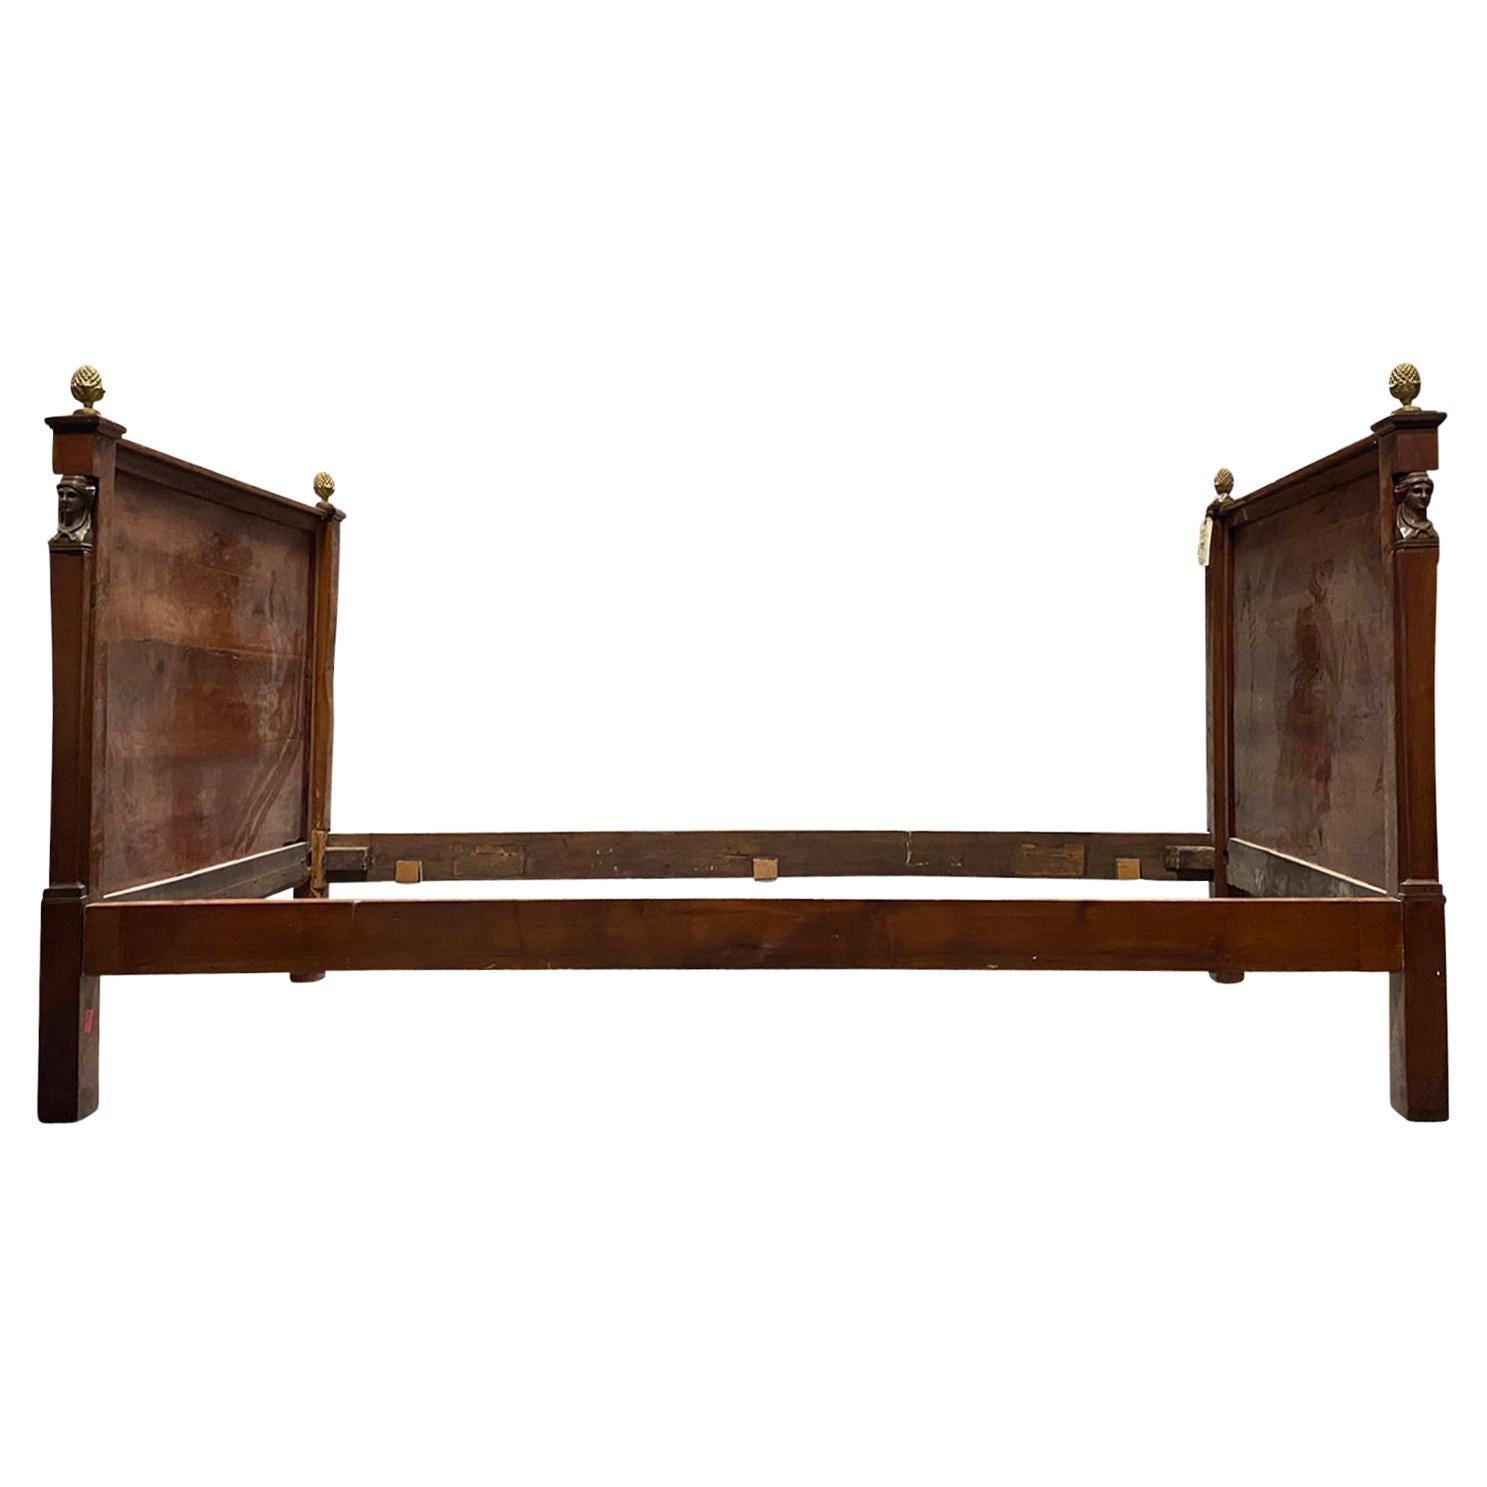 19th Century French Empire Wood Bed / Daybed